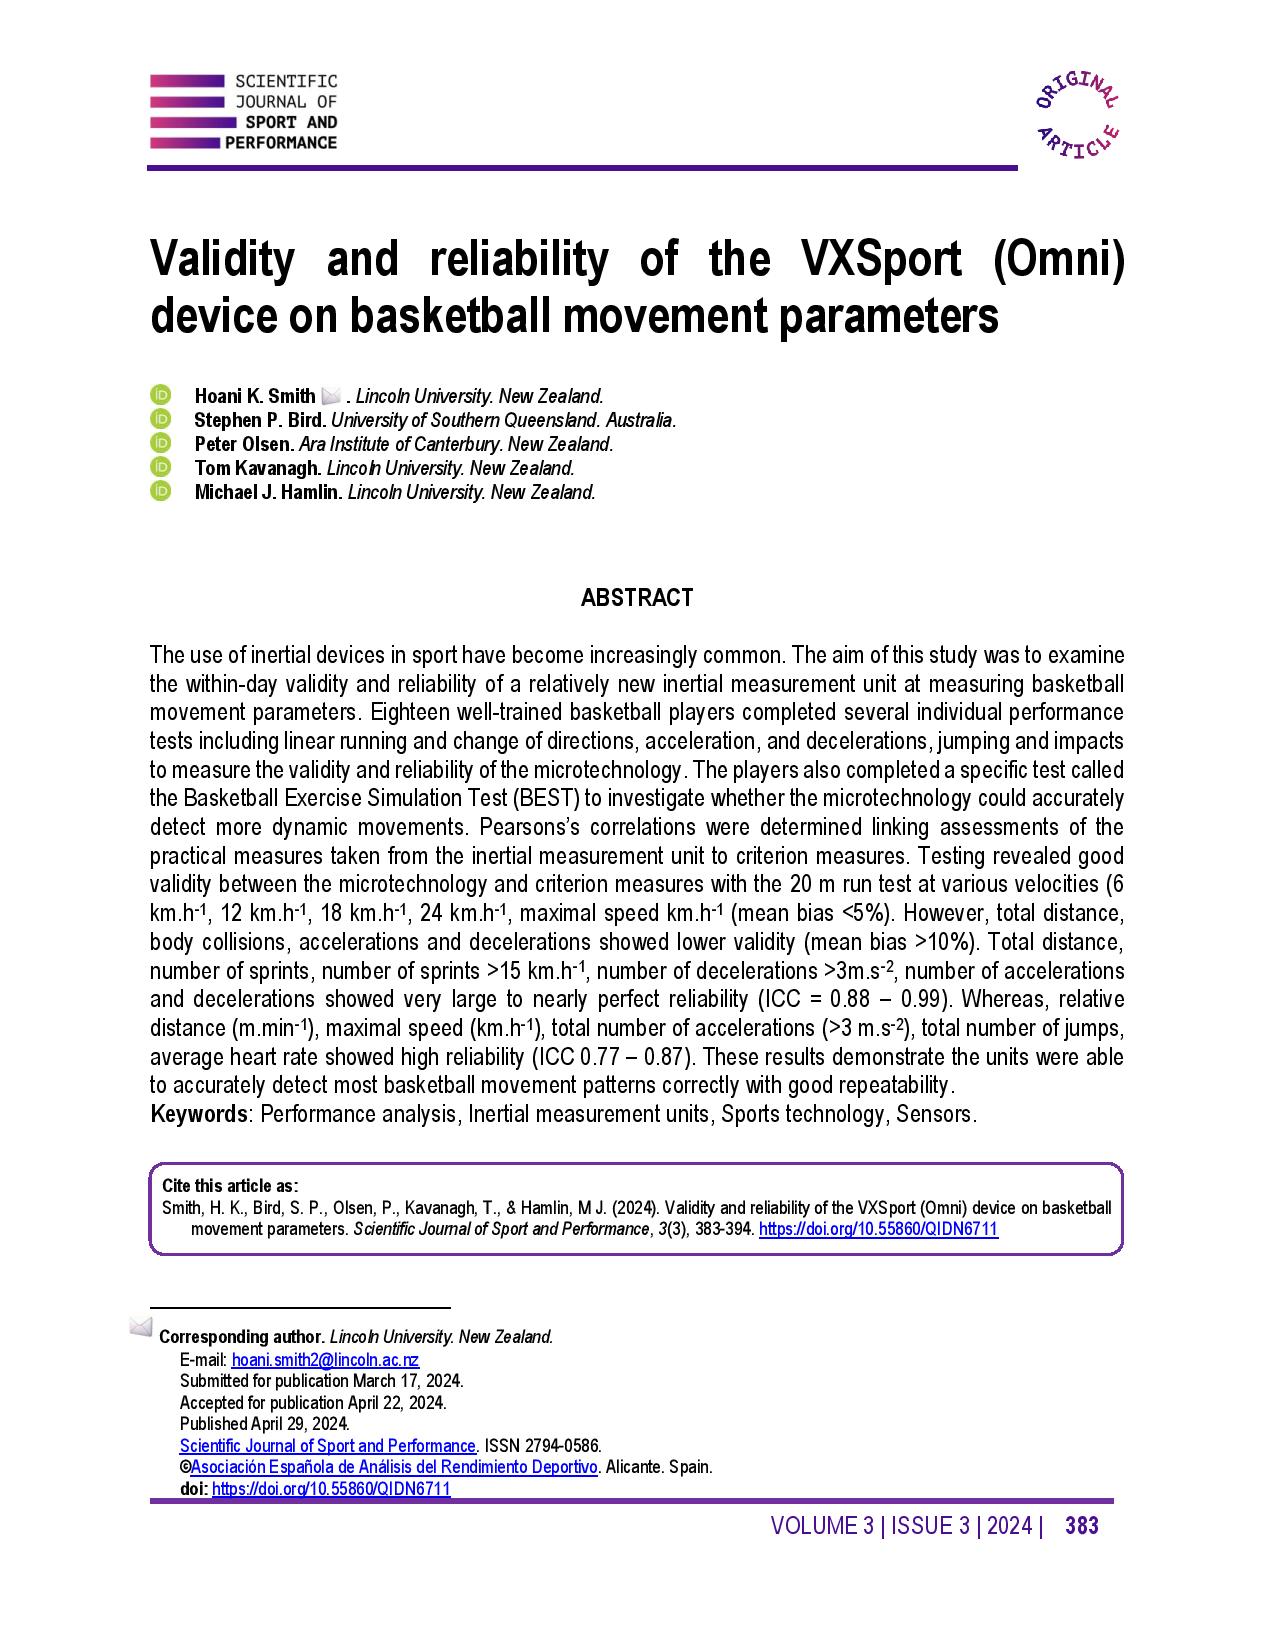 Validity and reliability of the VXSport (Omni) device on basketball movement parameters